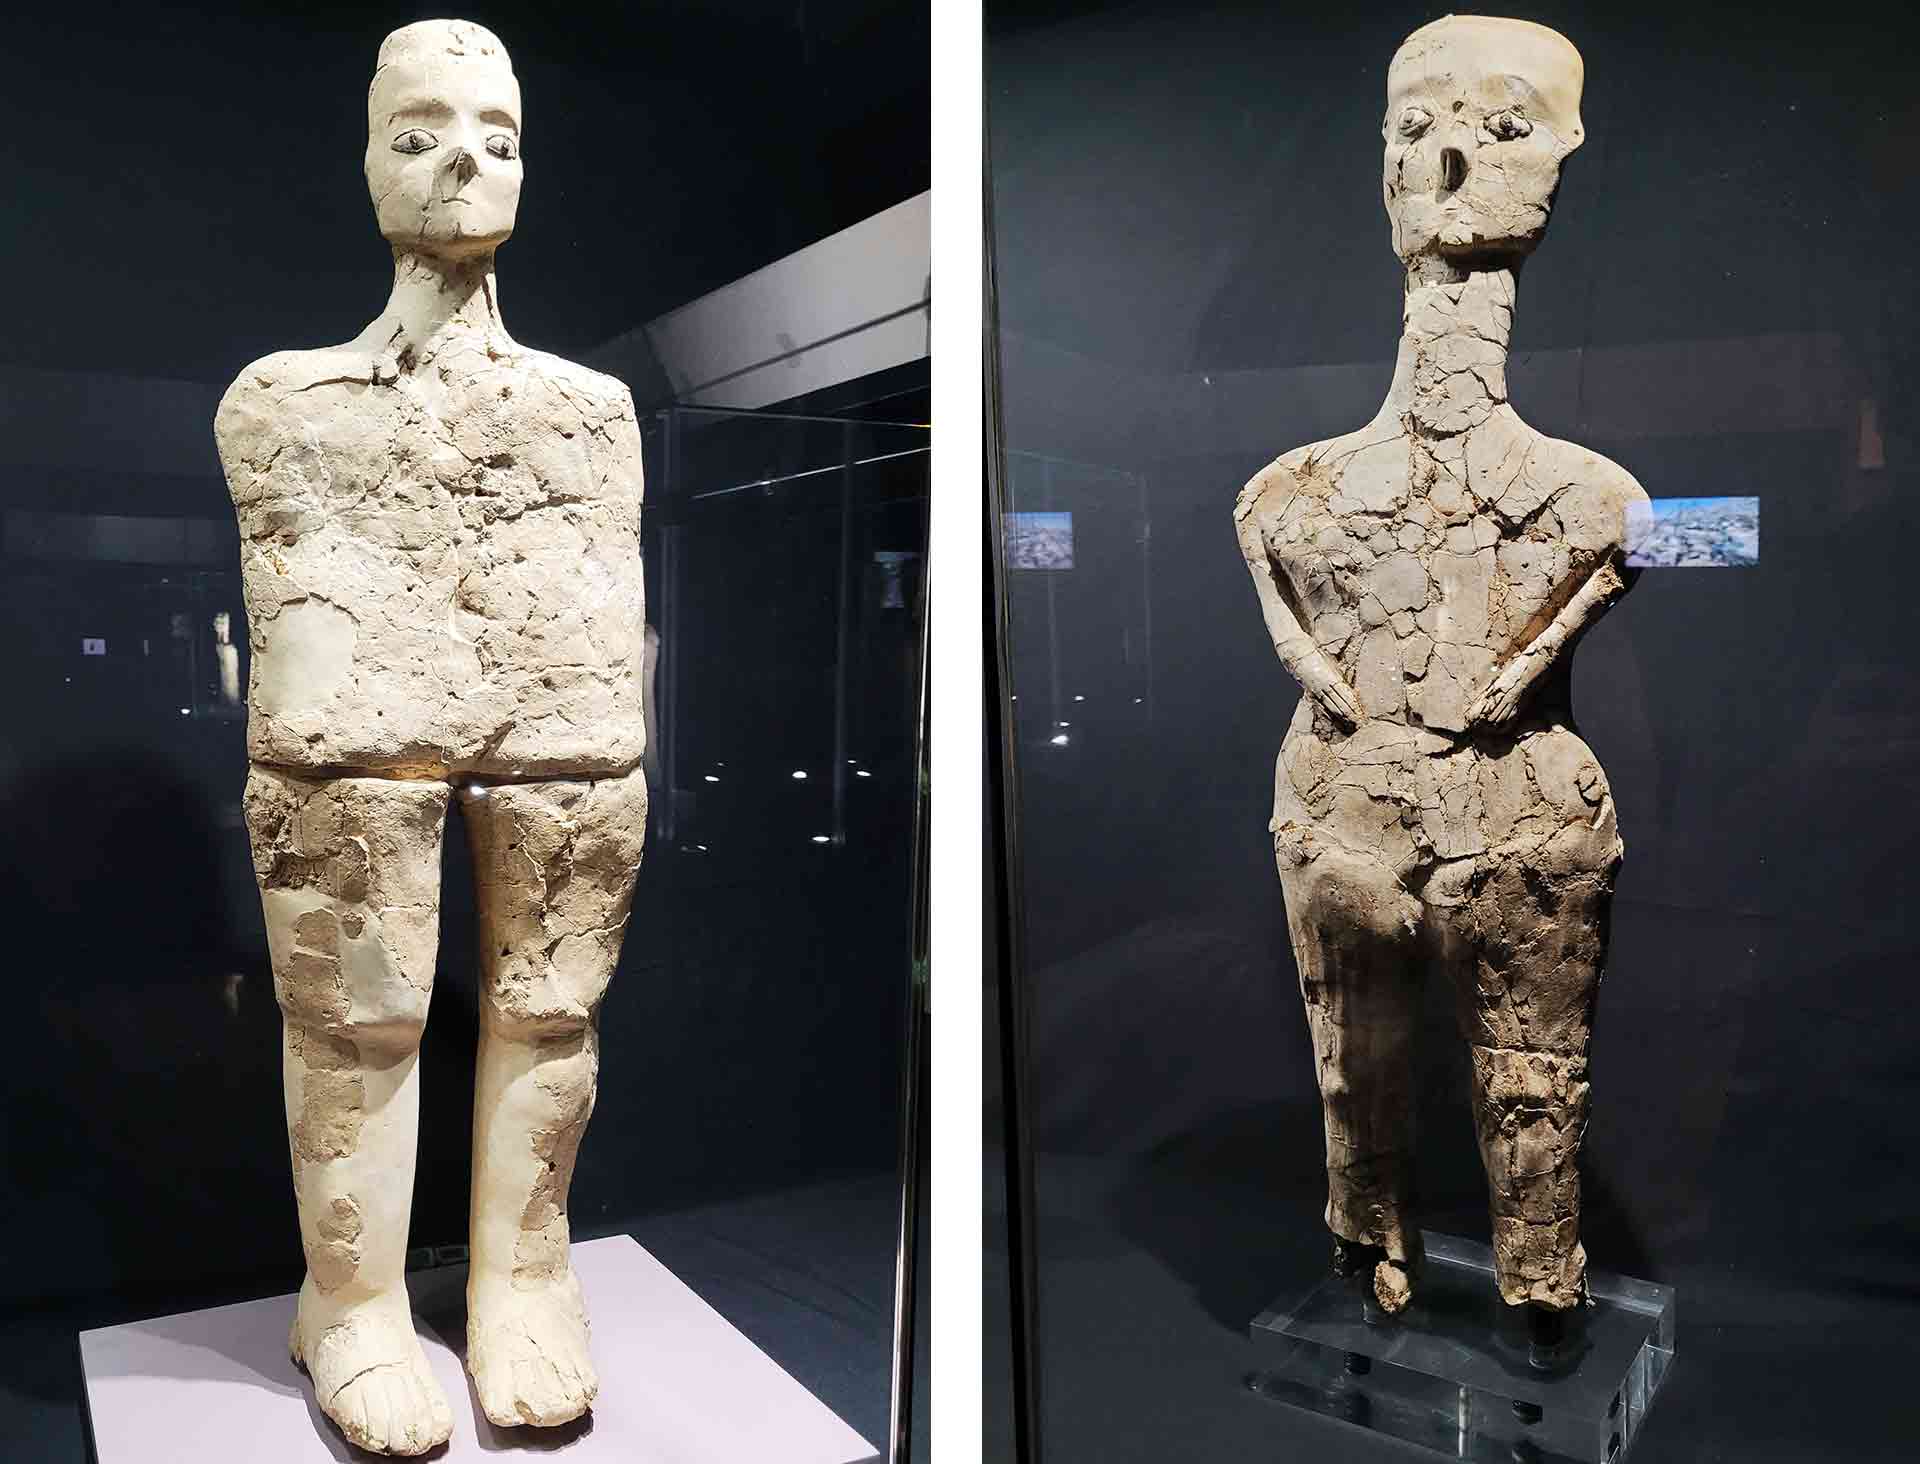 The AIn Ghazal statues in the Jordan Museum, Amman, are the most ancient human statues ever found